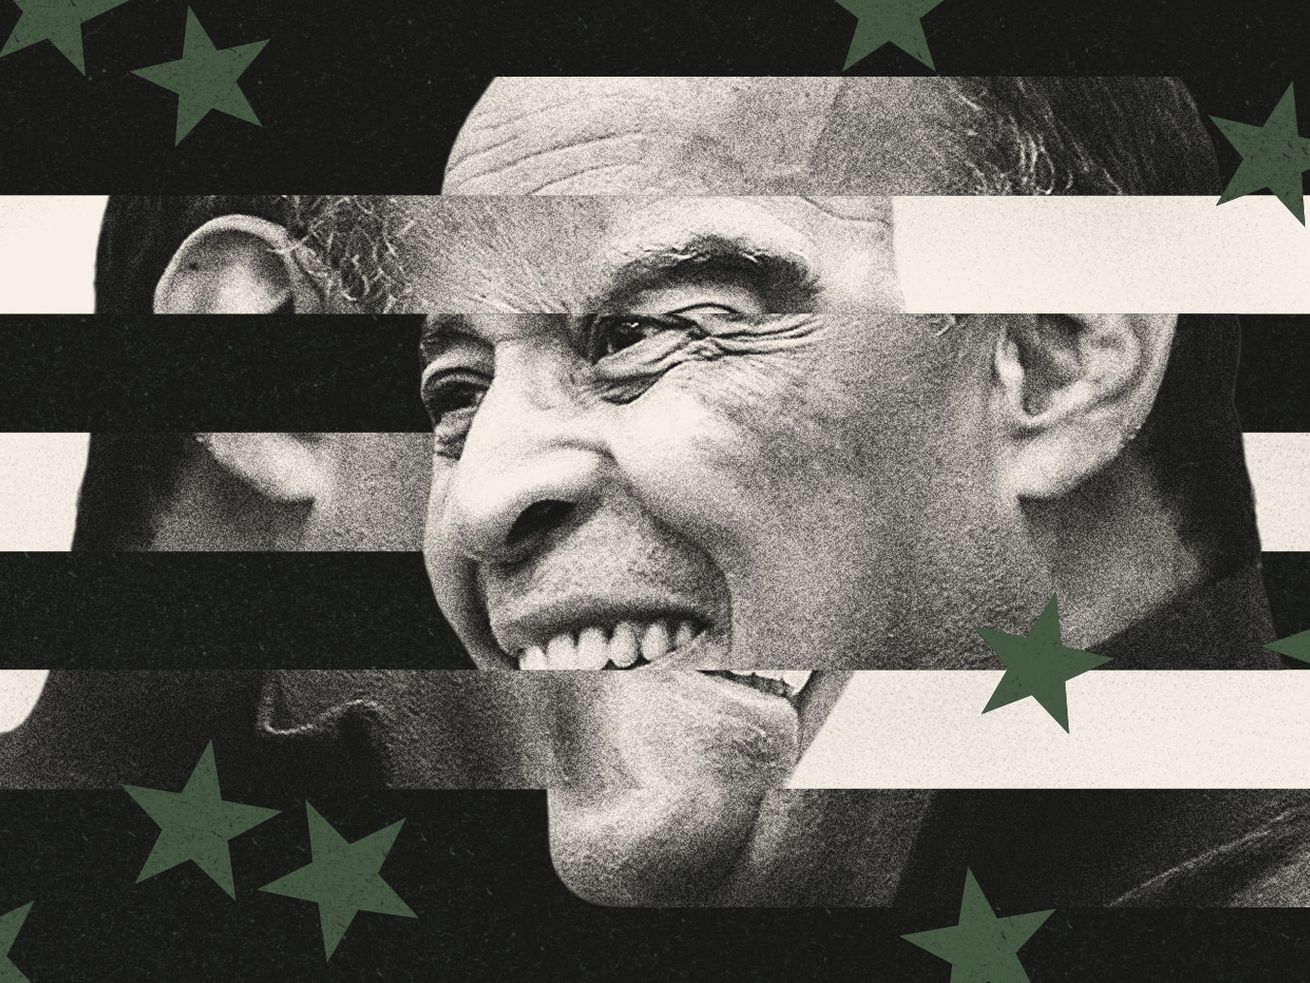 A photo illustration shows a Black man, scholar Adolph Reed, in profile and smiling. In the background is another Black man with his face not visible, and over both, there are stripes of black and white, with scattered dark green stars, as from the US flag in different colors.